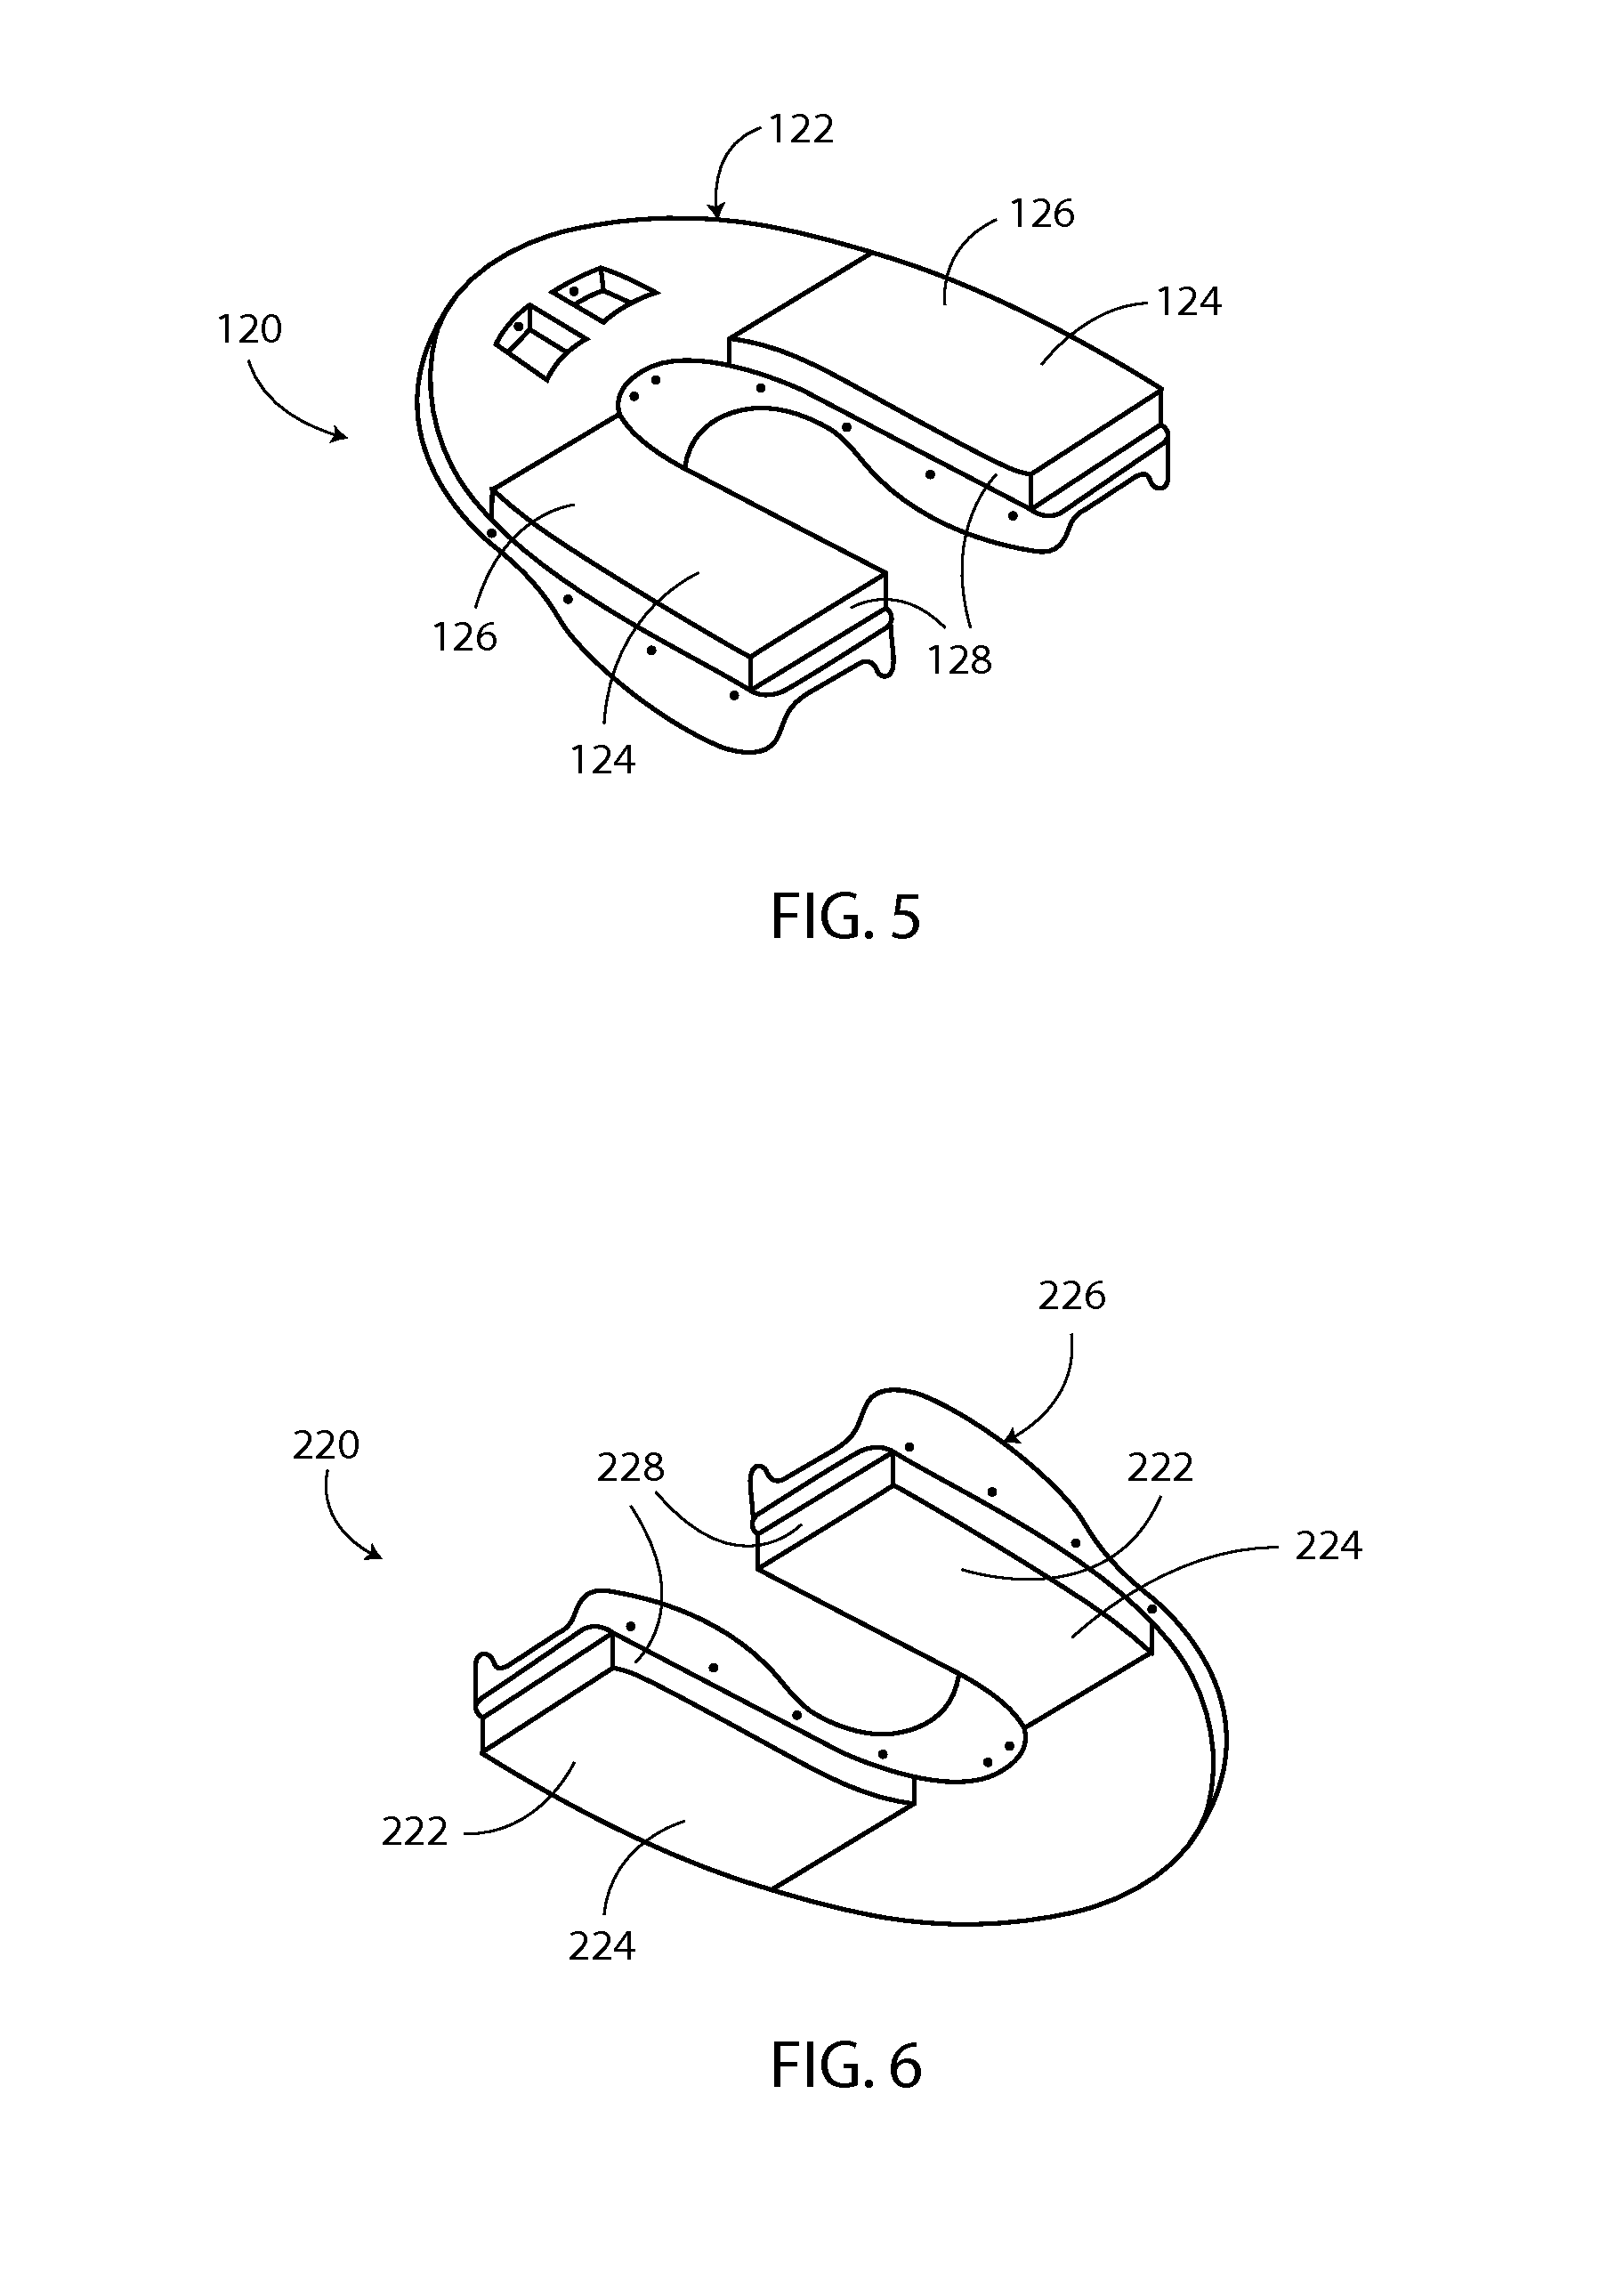 Method Of Fitting A User With An Athletic Mouthguard